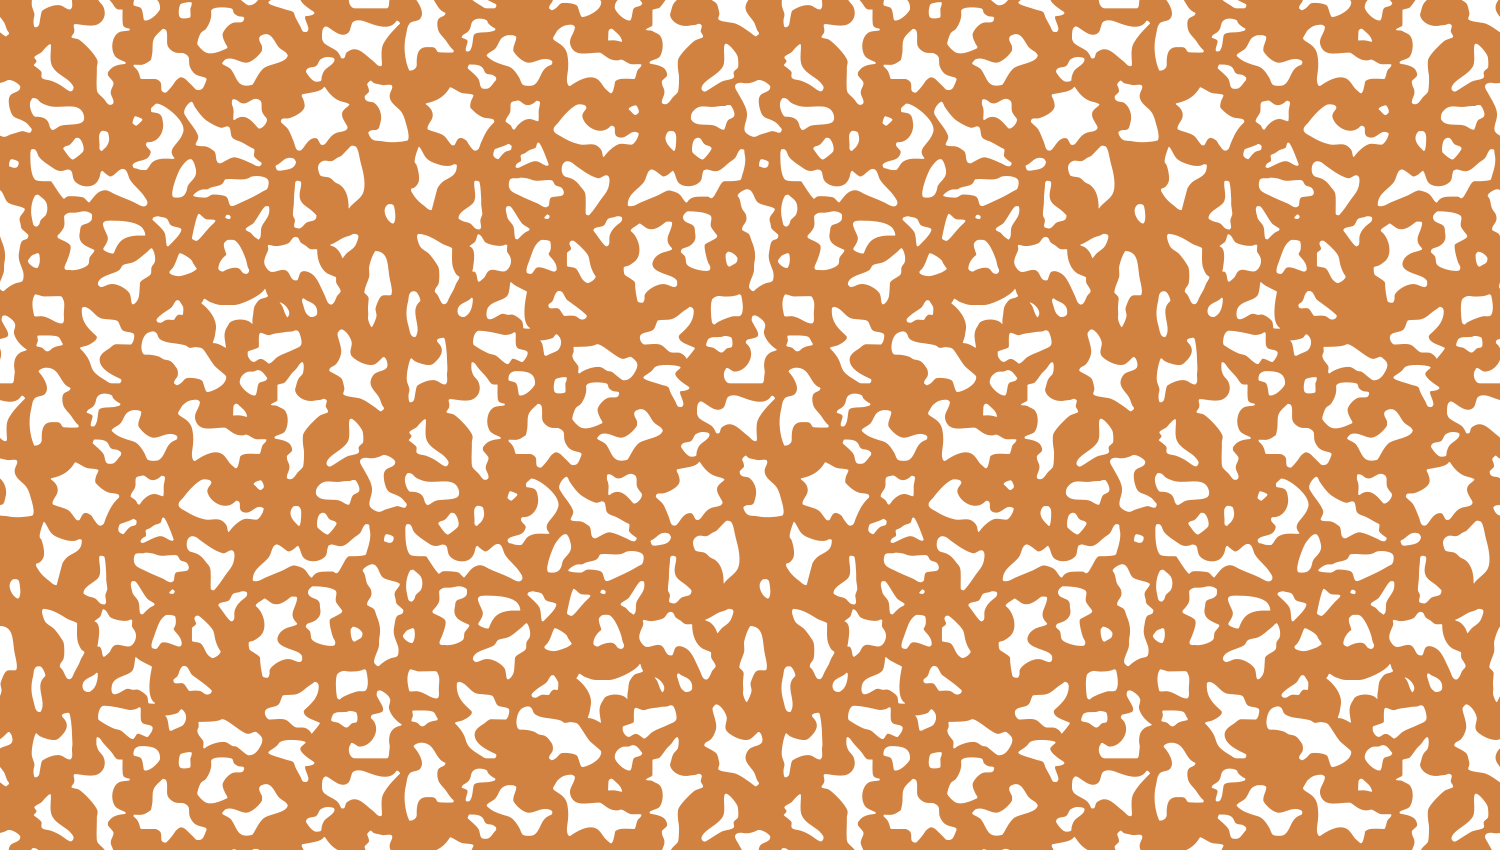 Parasoleil™ Nukubalavu© pattern displayed with a ochre color overlay